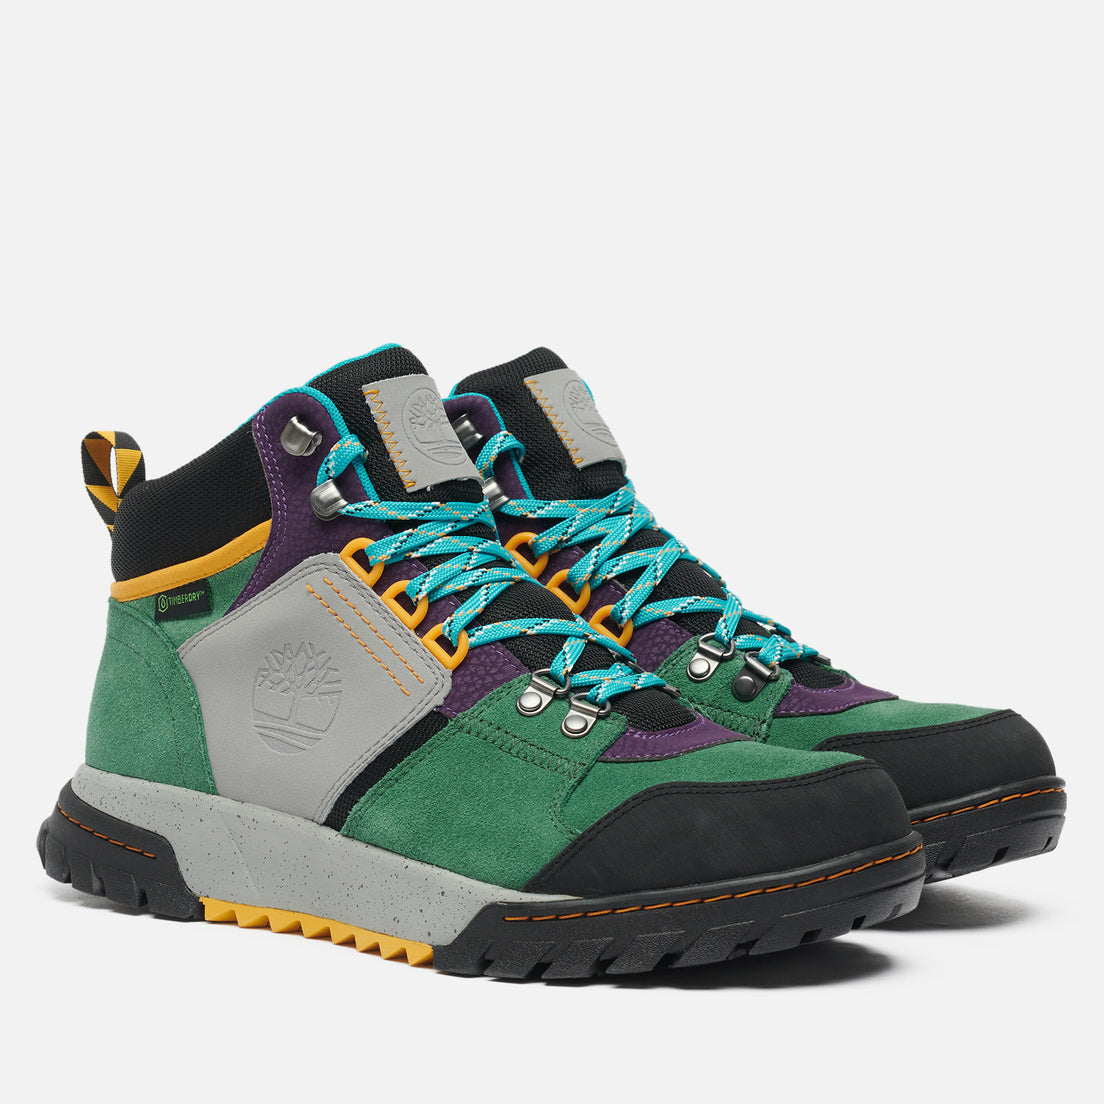 TIMBERLAND - TRAIL MID HIKER MOUNTAIN BOOTS